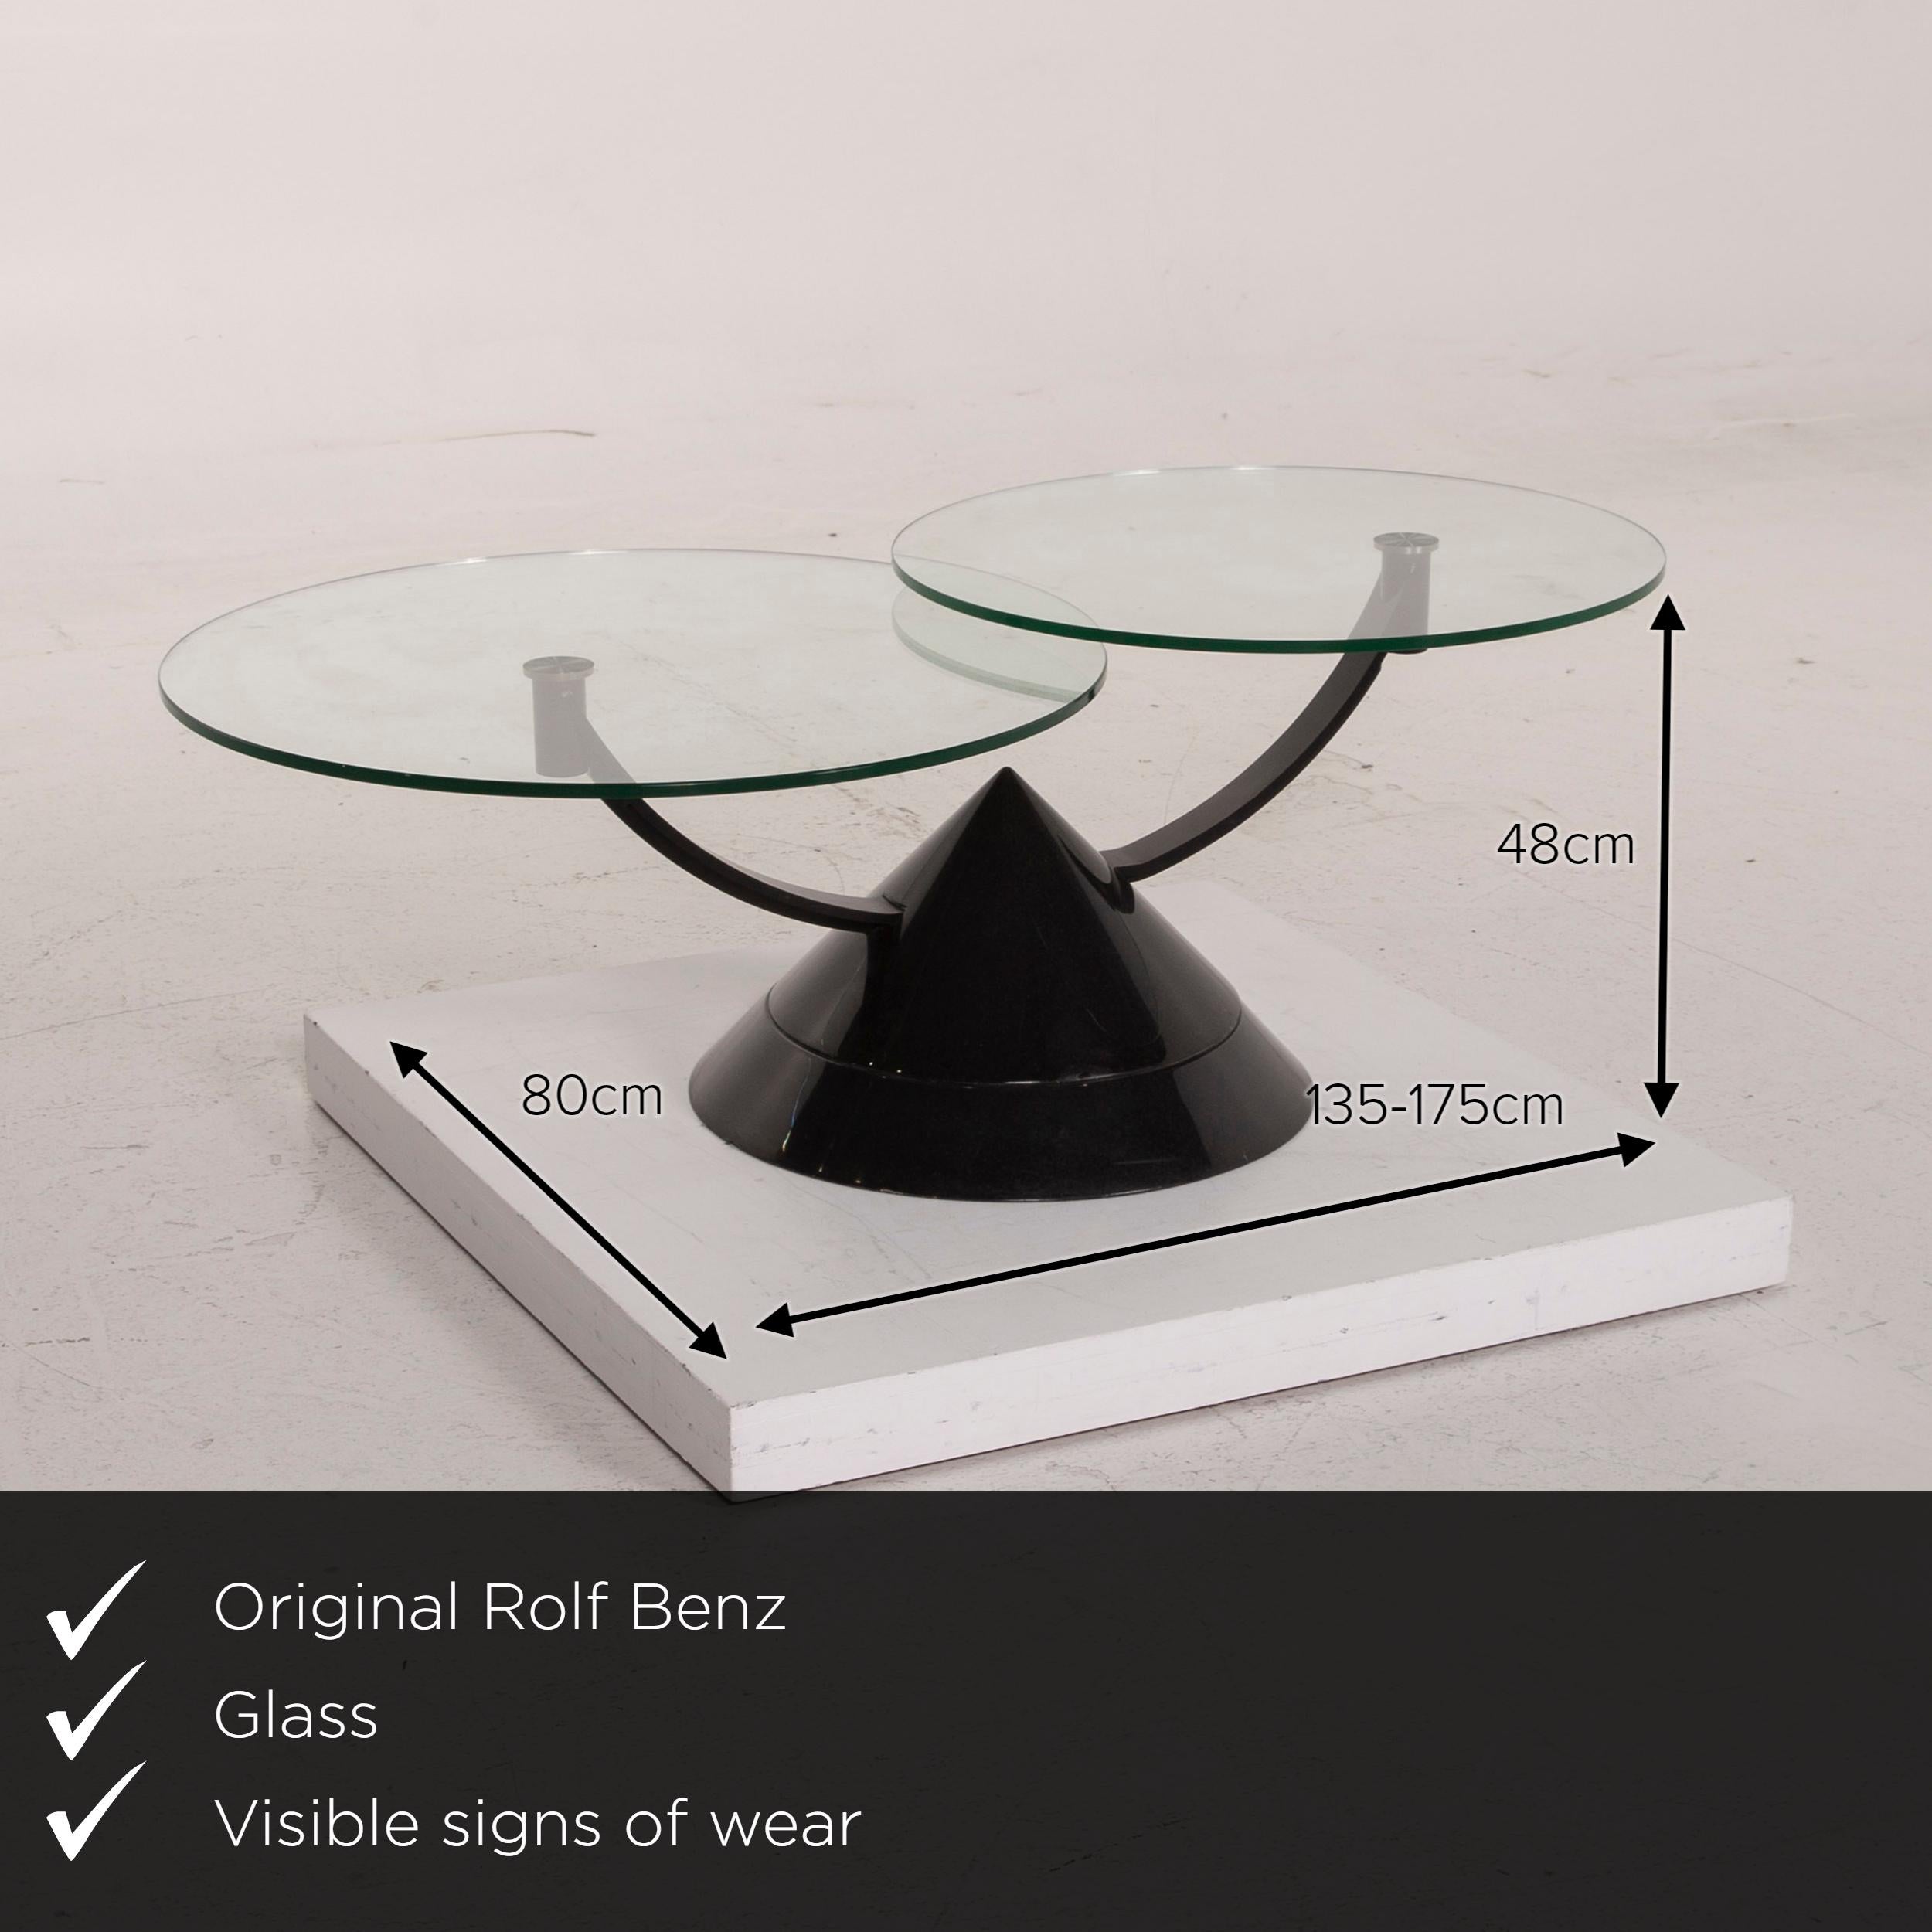 We present to you a Rolf Benz glass table black coffee table stone outlet adjustable.


 Product measurements in centimeters:
 

 Depth 80
 Width 135
 Height 48.





 